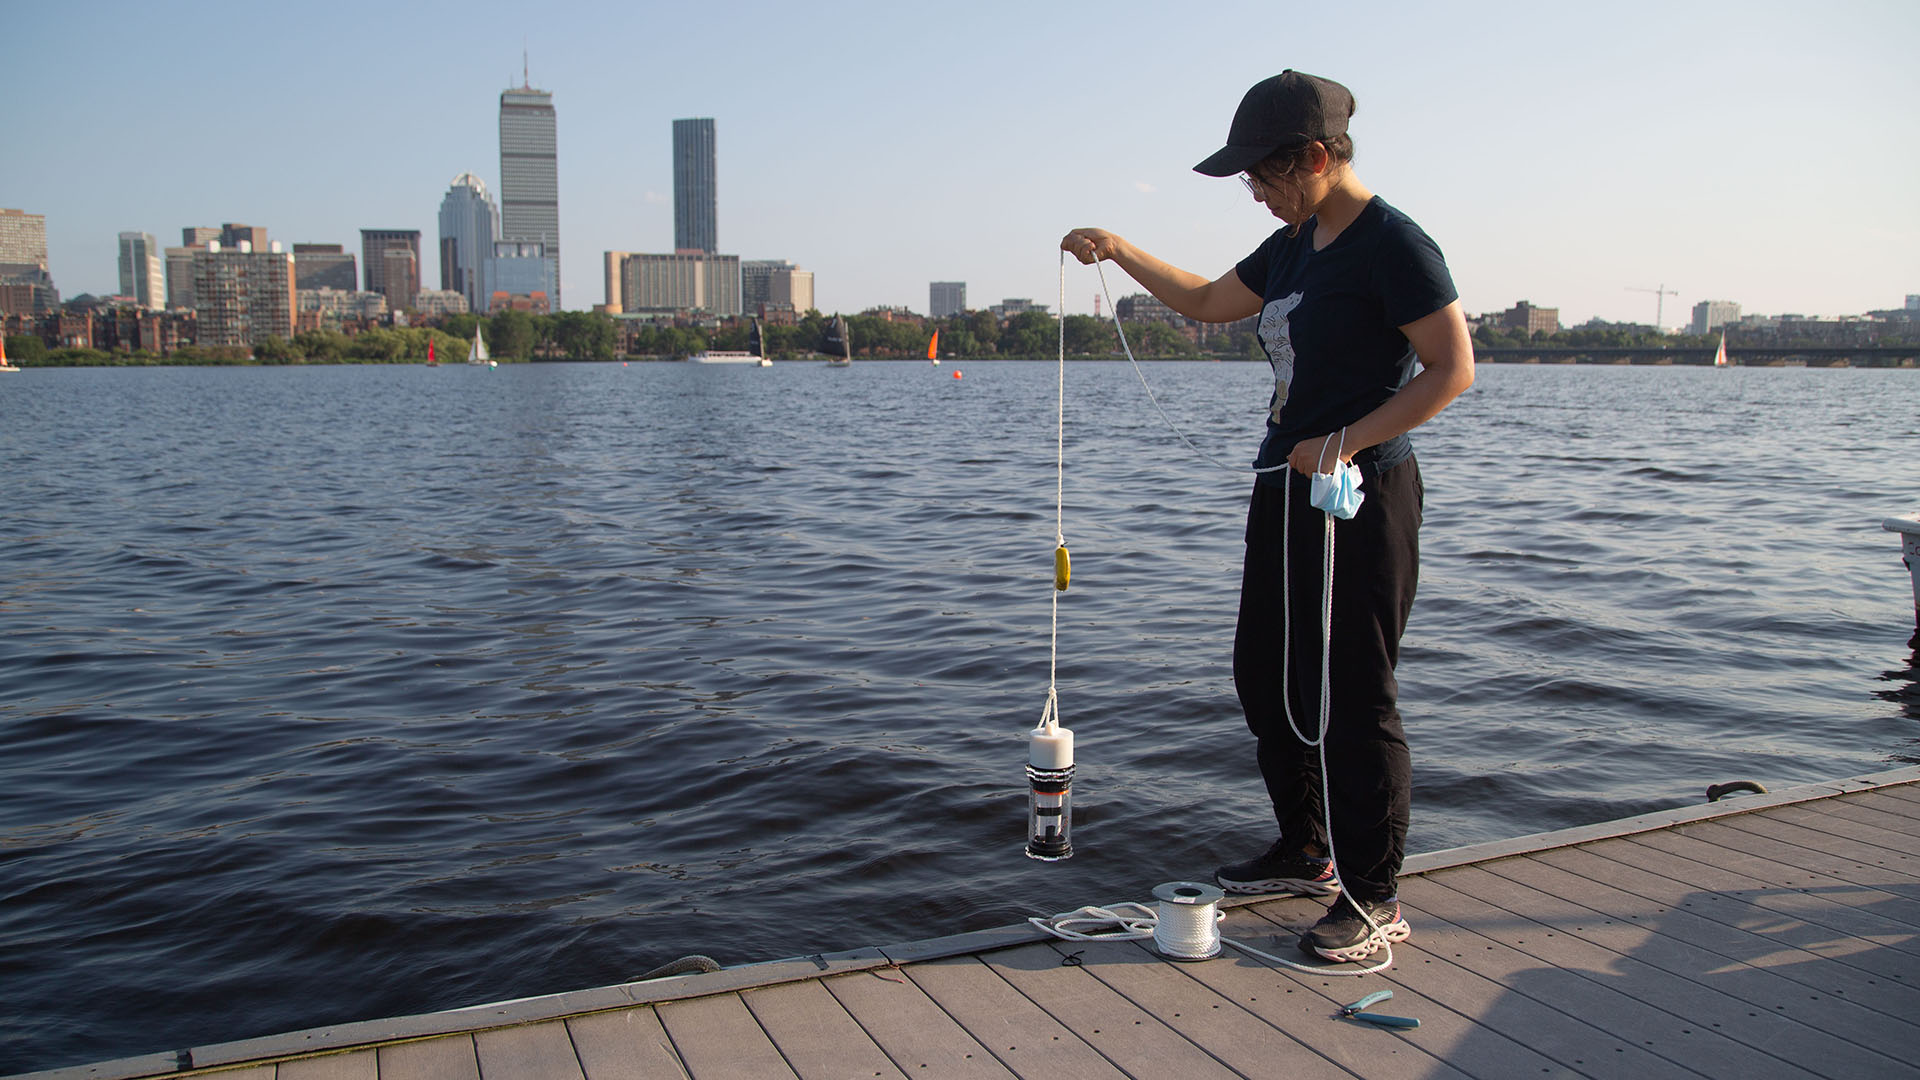 Person standing on a dock holding a device above the water.